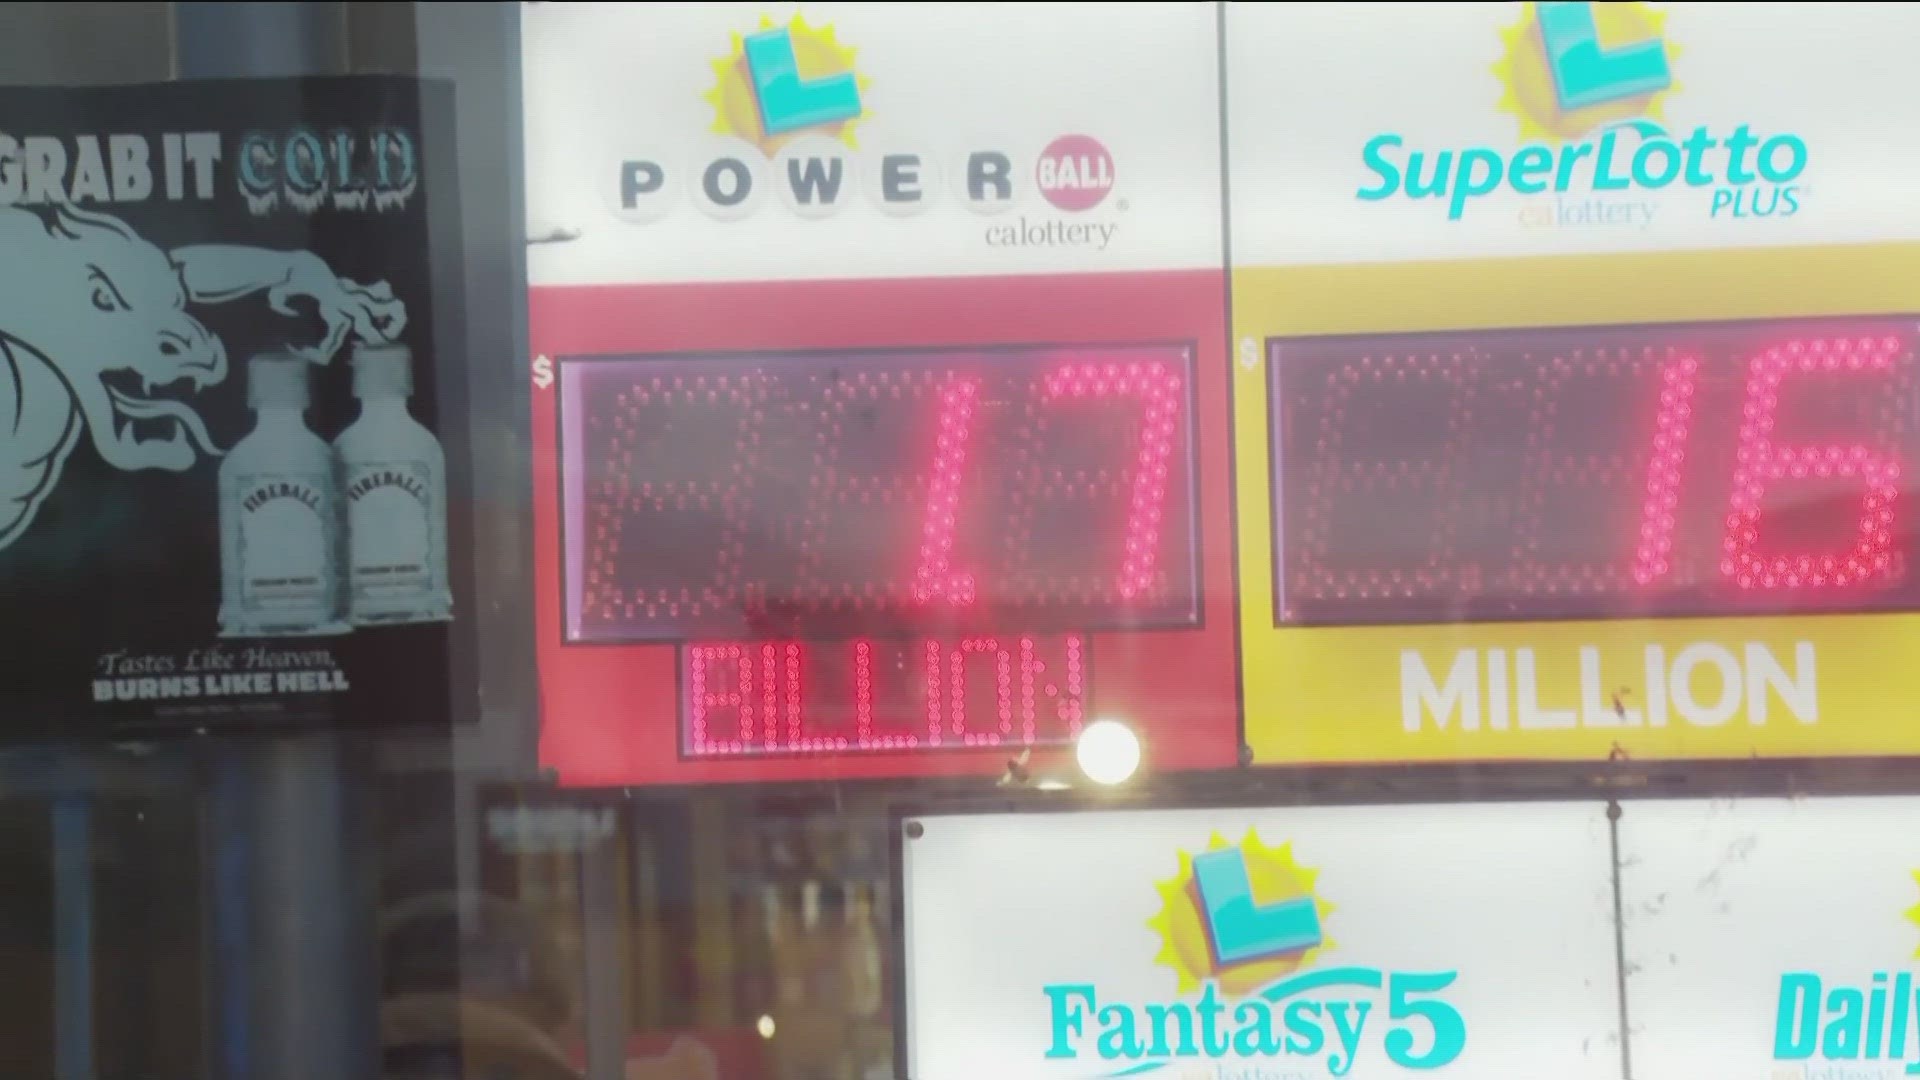 Wednesday's Powerball Jackpot has reached a near-record $1.73 billion after Monday's drawing yielded no winner.